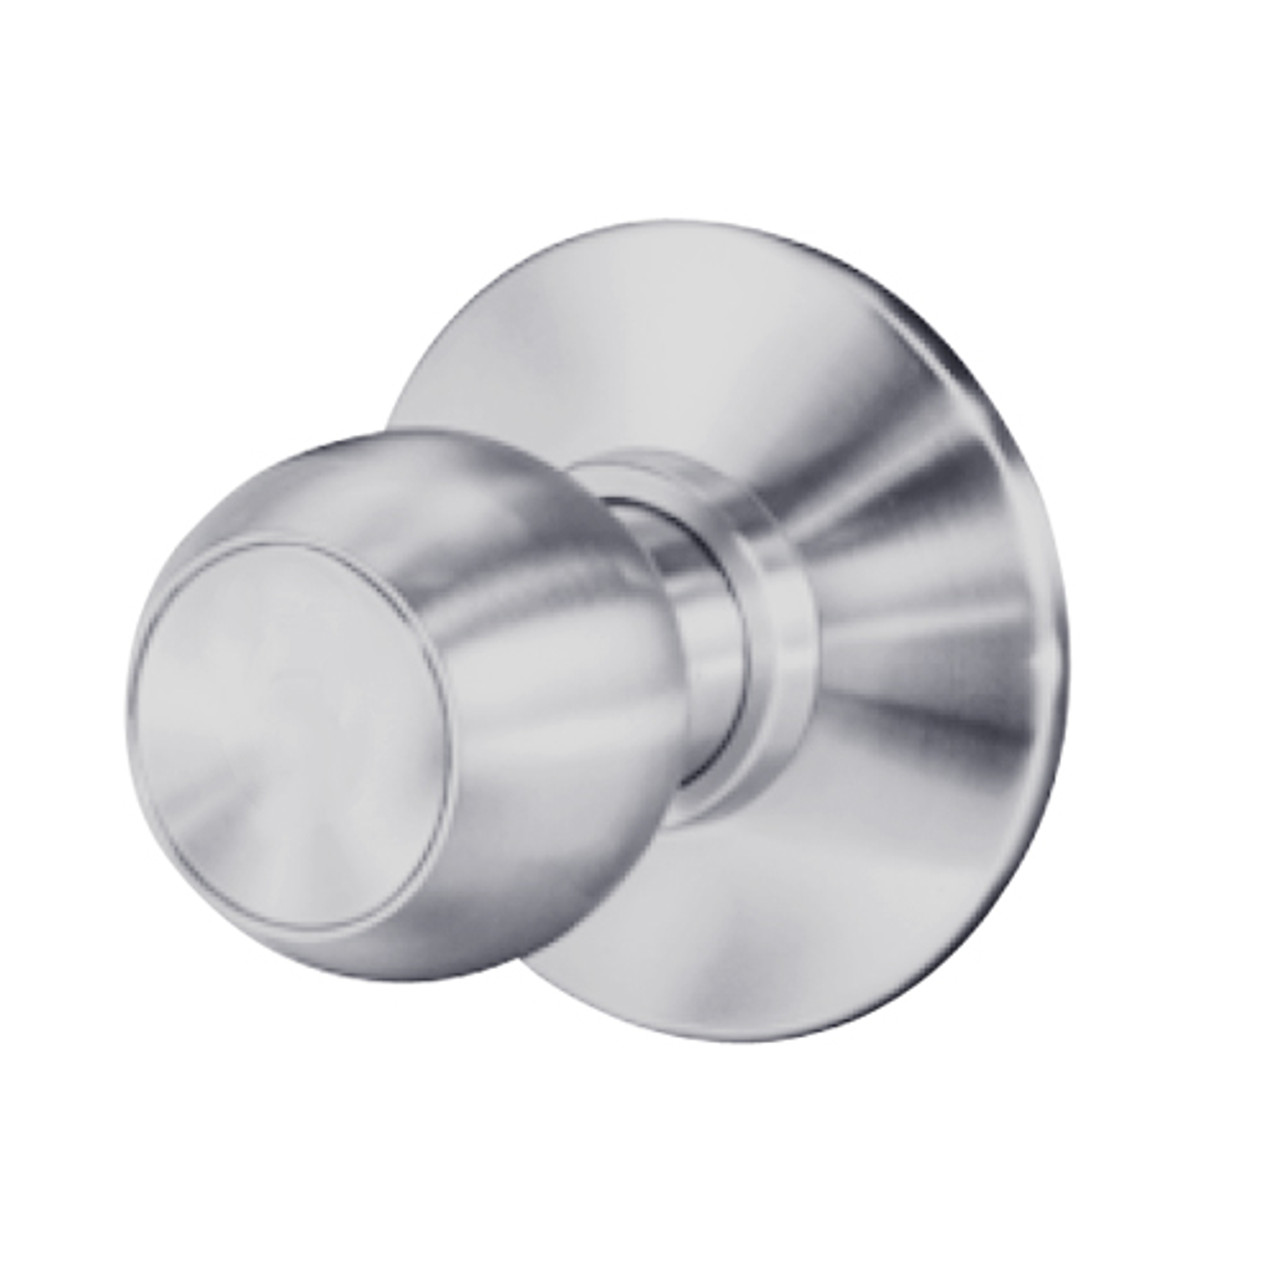 8K30Q4DS3626 Best 8K Series Exit Heavy Duty Cylindrical Knob Locks with Round Style in Satin Chrome